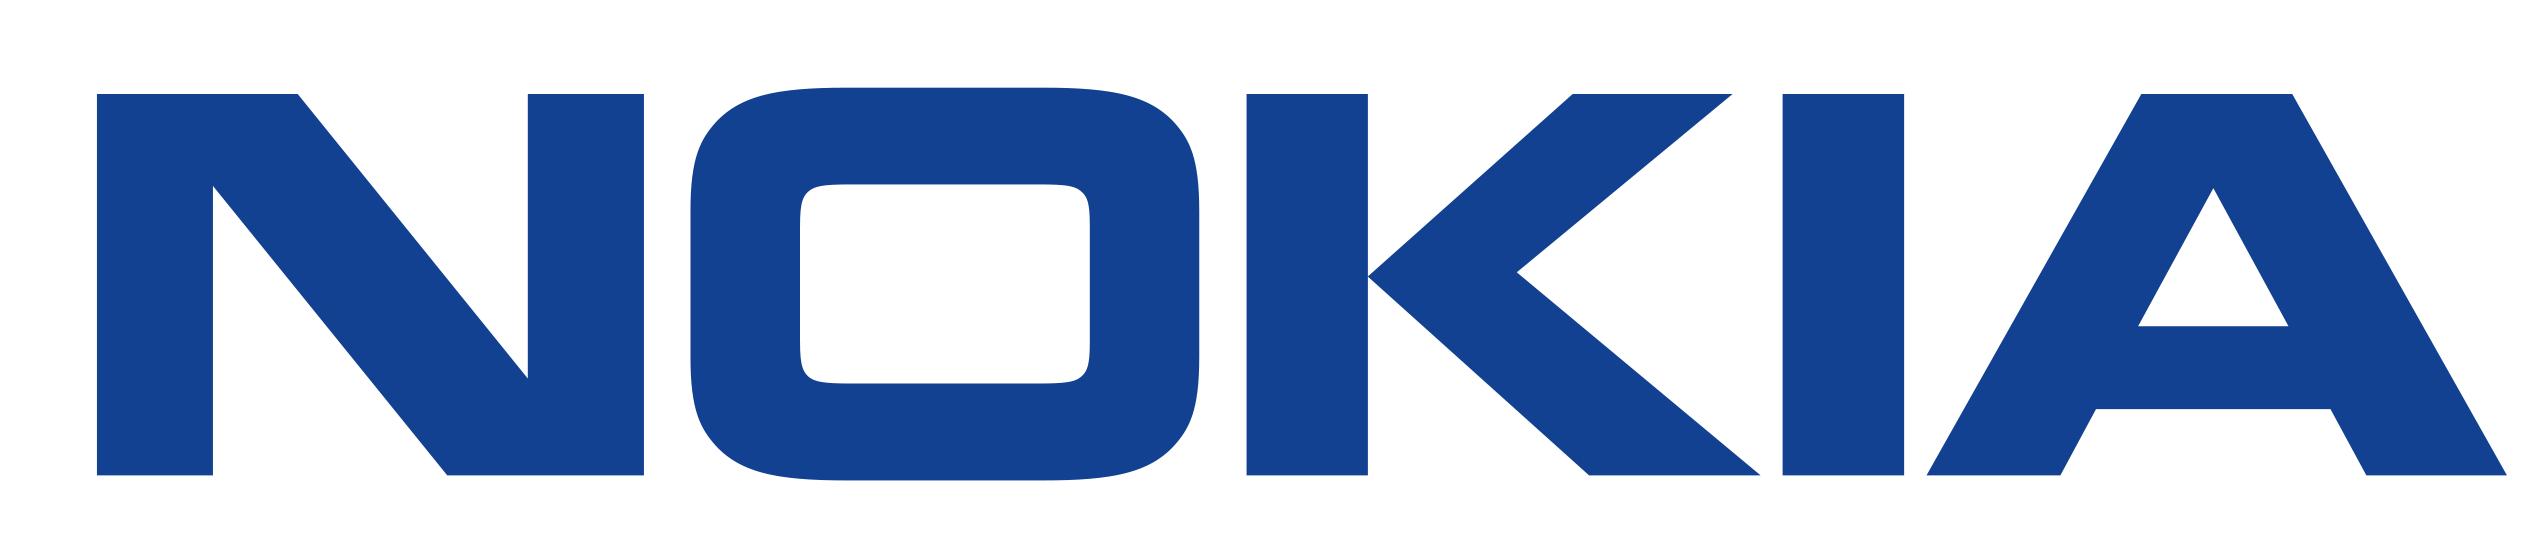 nokia-cropped.png (57 KB)